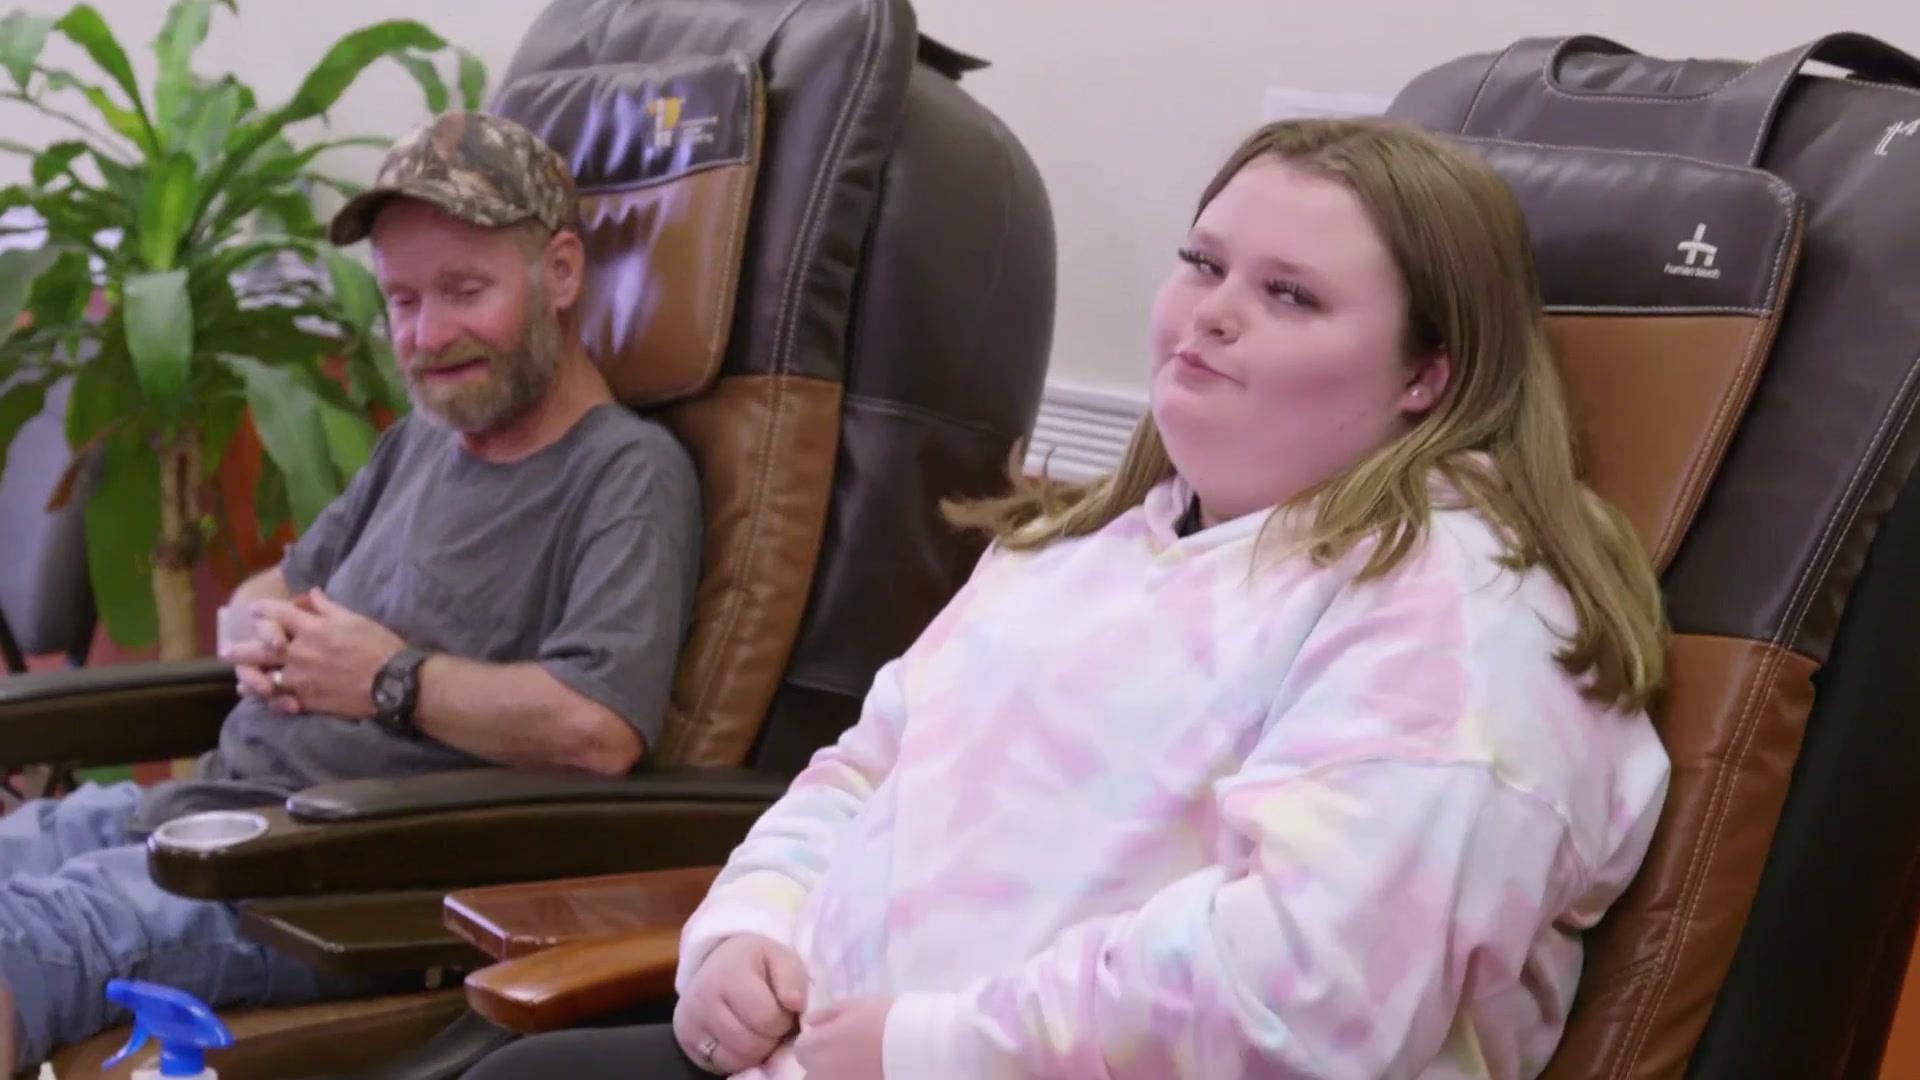 Watch Alana & Sugar Bear's Day at the Spa! | Mama June: From Not to Hot Video Extras